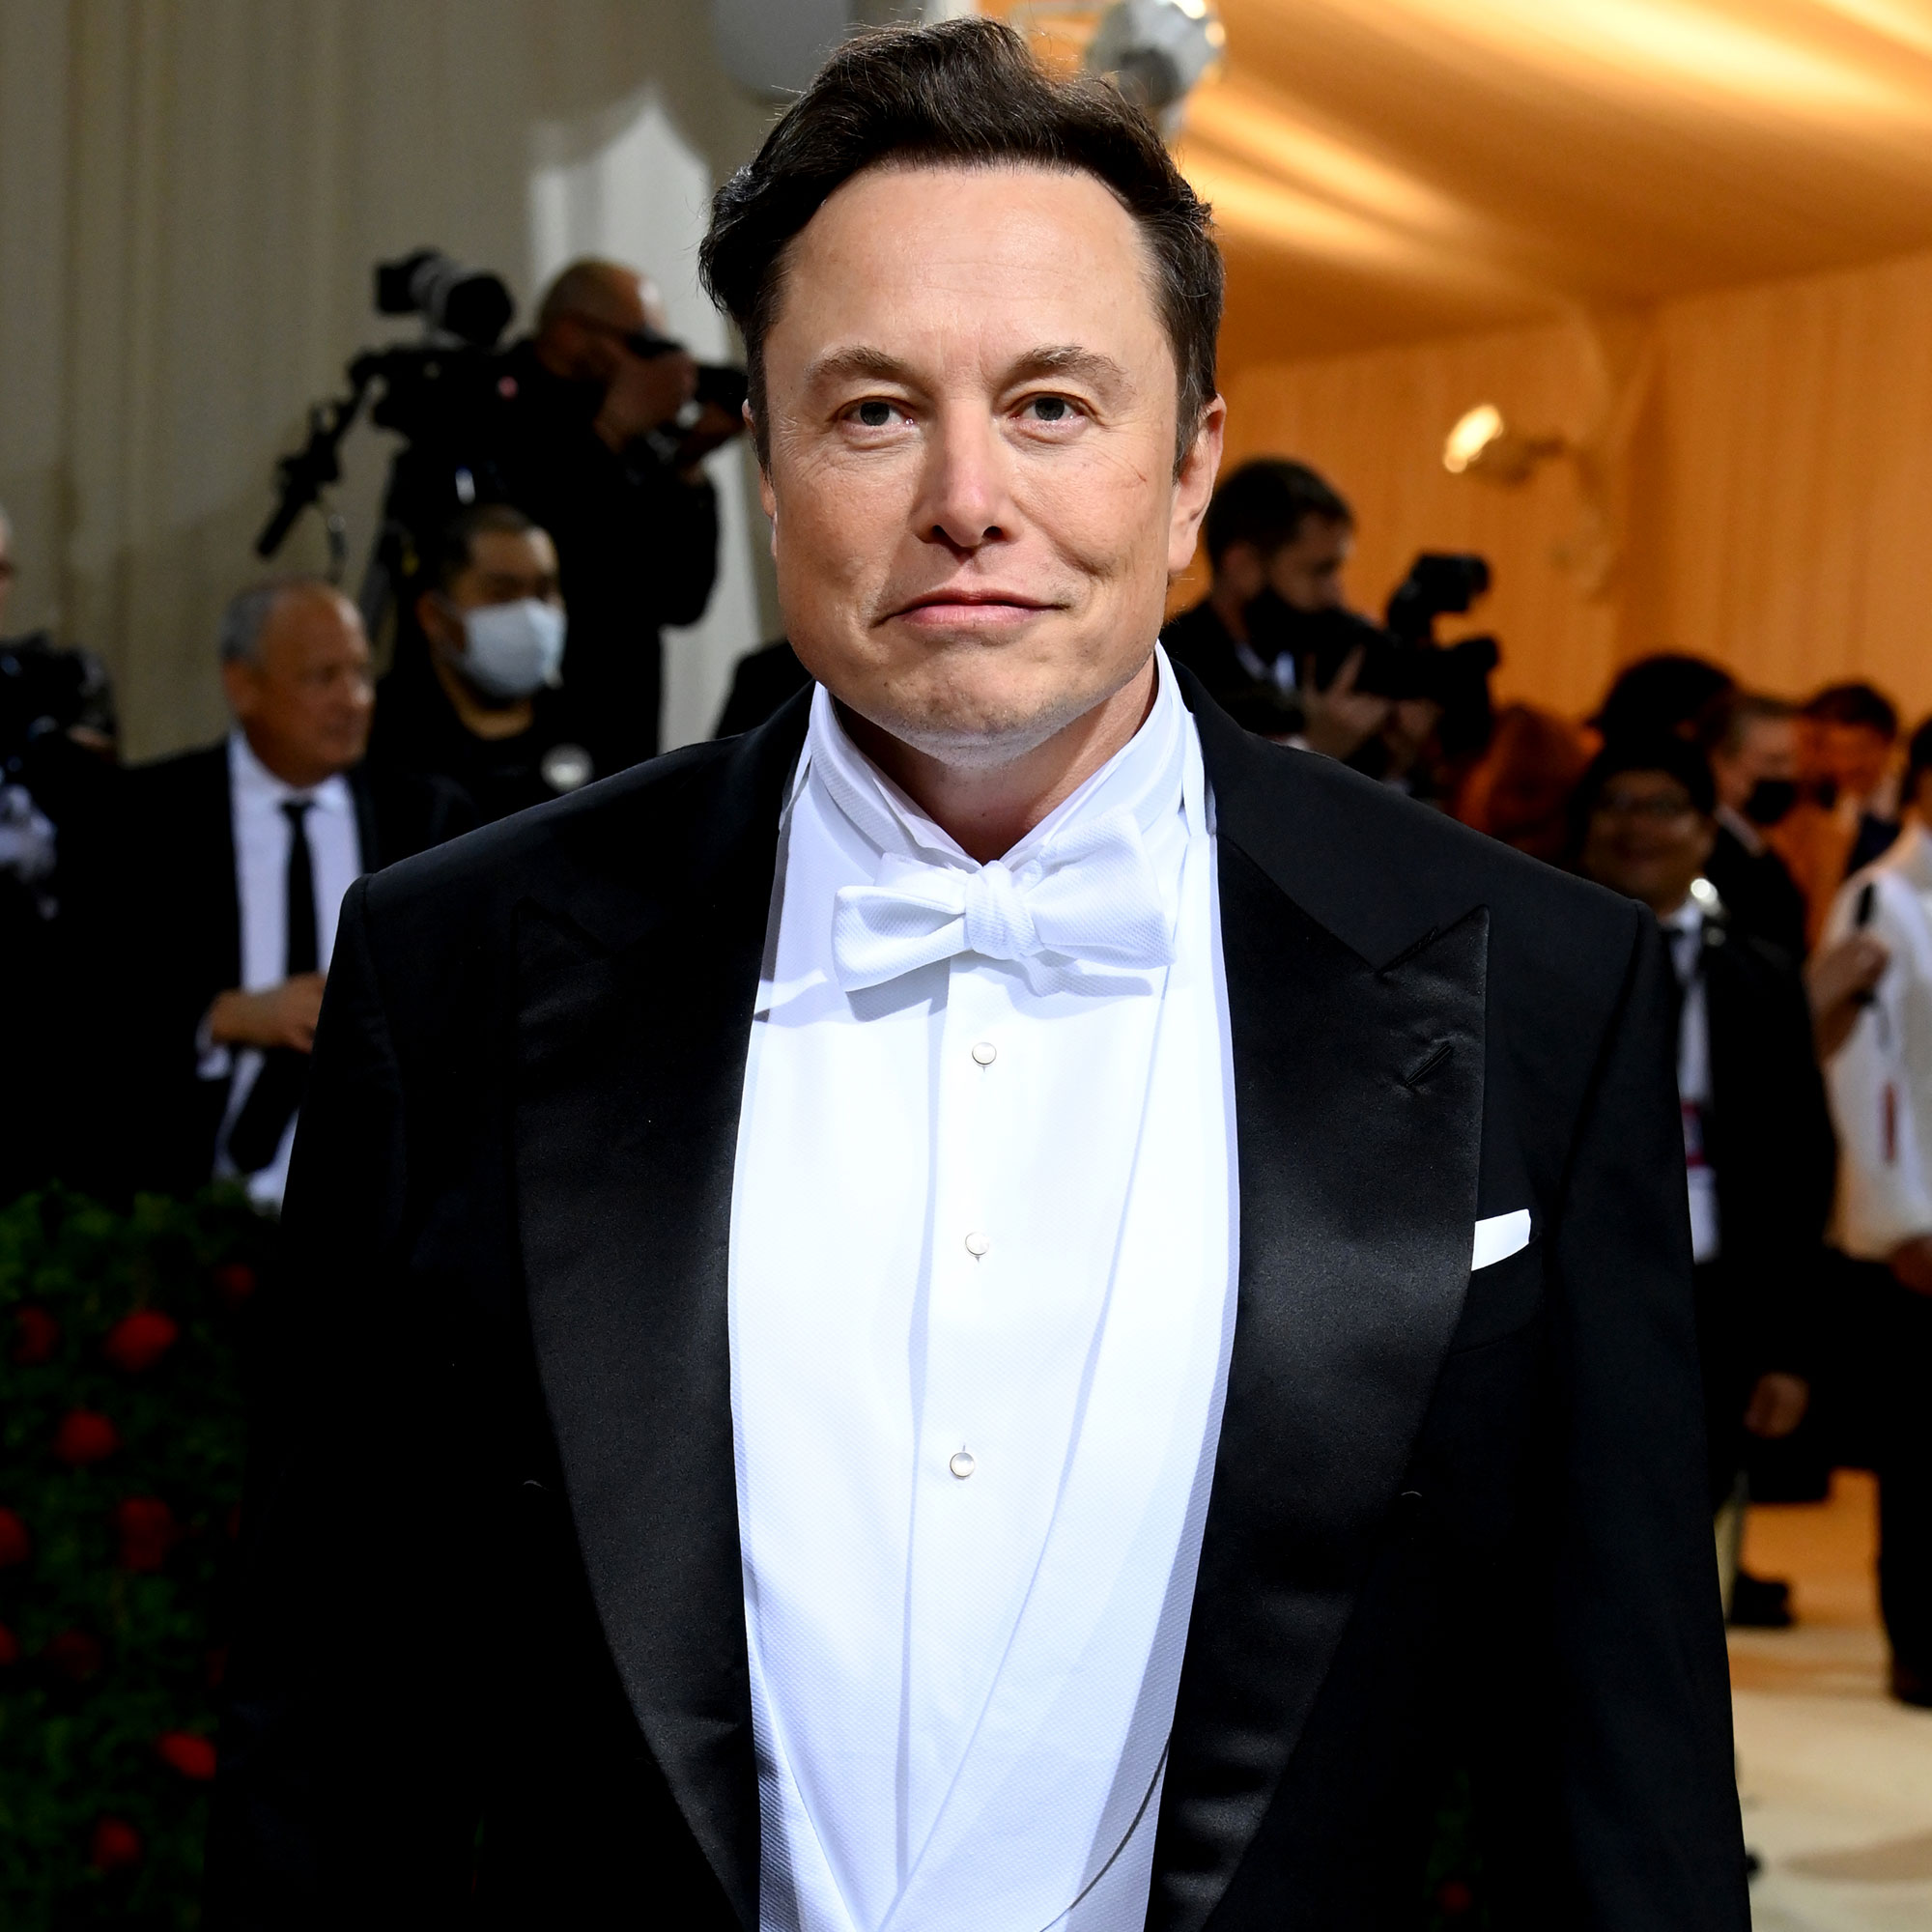 Wife Swaping Hd Cheatxxx Porn - Elon Musk Reacts to Sexual Misconduct Allegation: Details